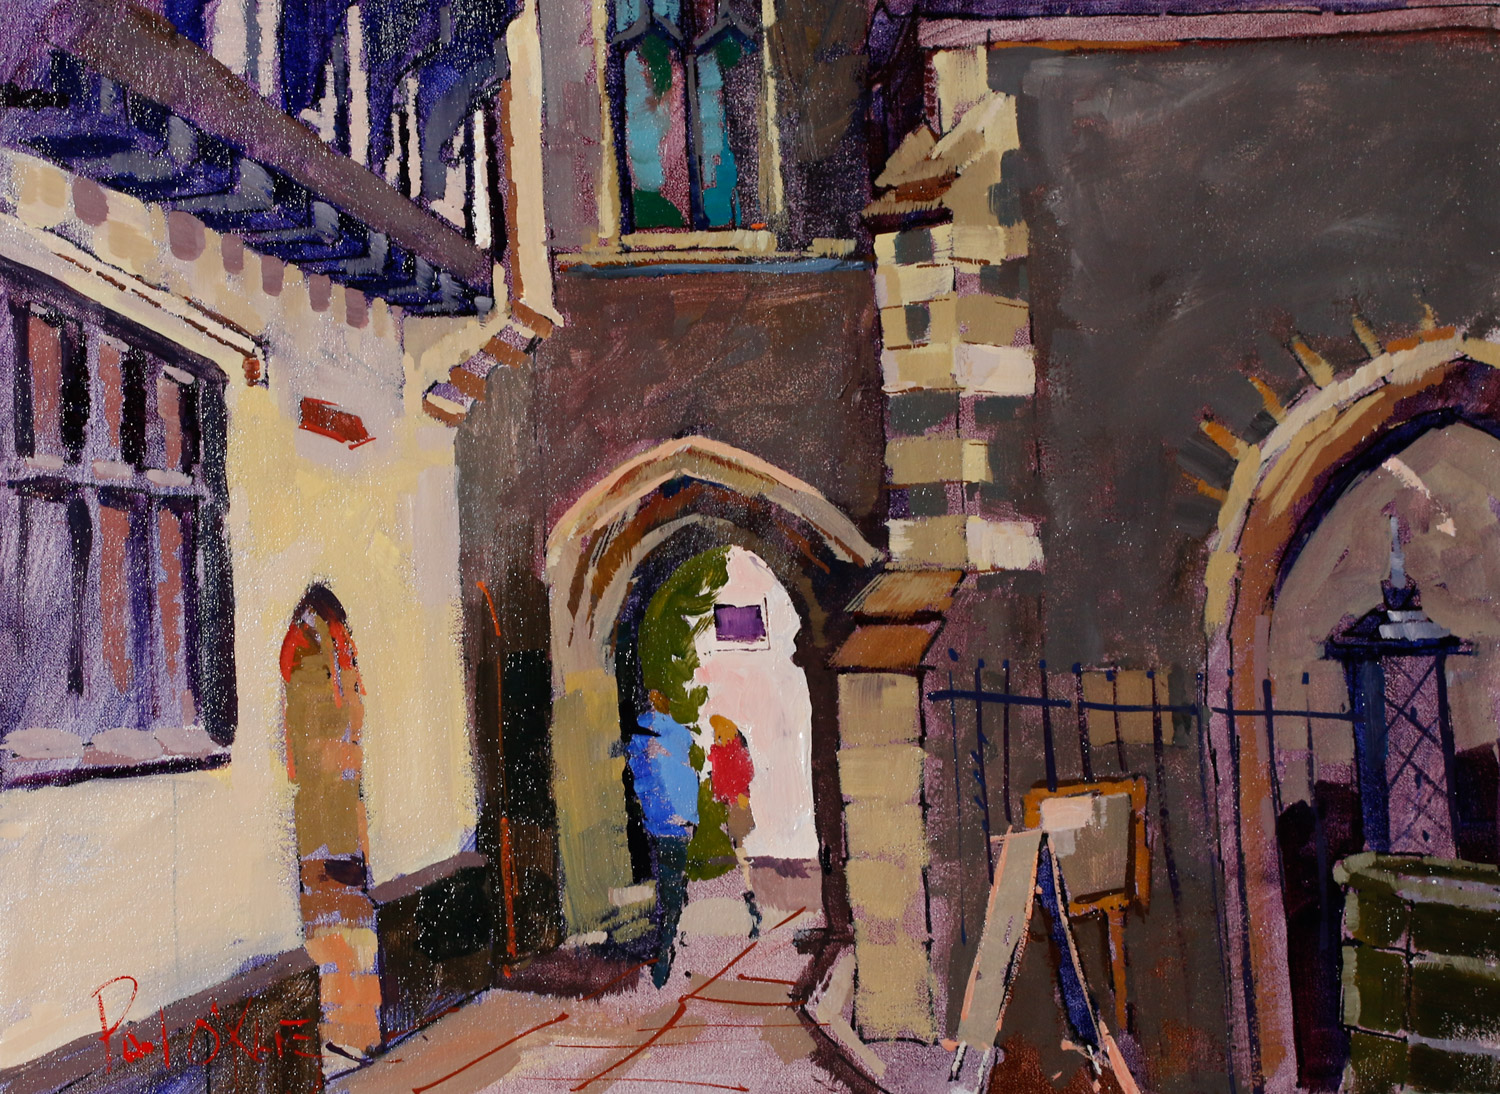 Artist Paul O'Kane - This Way the Maddermarket, £495 16x12 Oil on Canvas at Paint Out Norwich 2015 photo by Mark Ivan Benfield